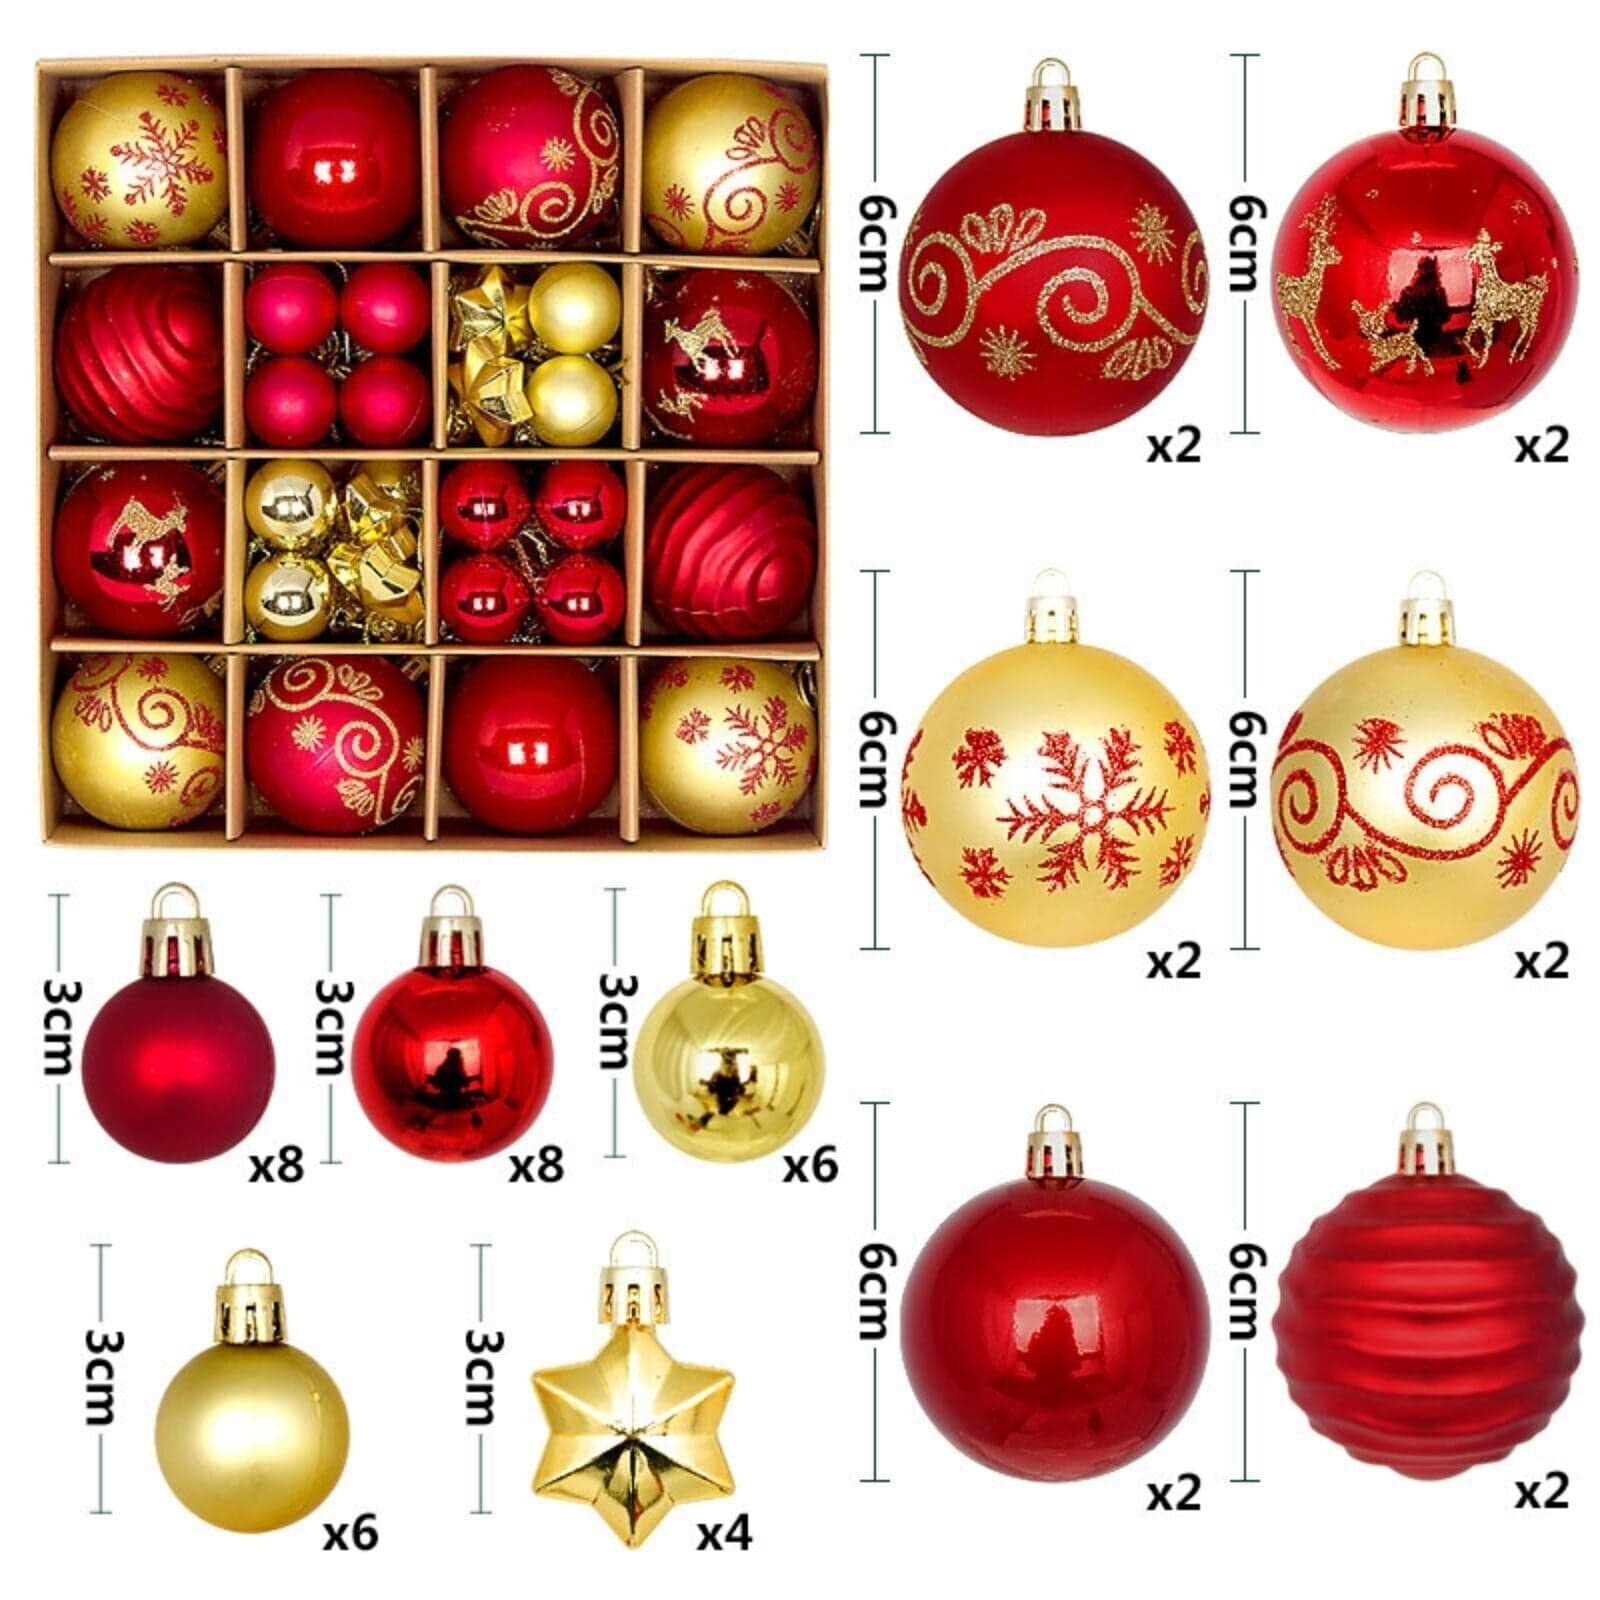 Red+Gold 44Pcs Christmas Glitter Balls Ornaments Xmas Tree Baubles Hanging Party Decor US